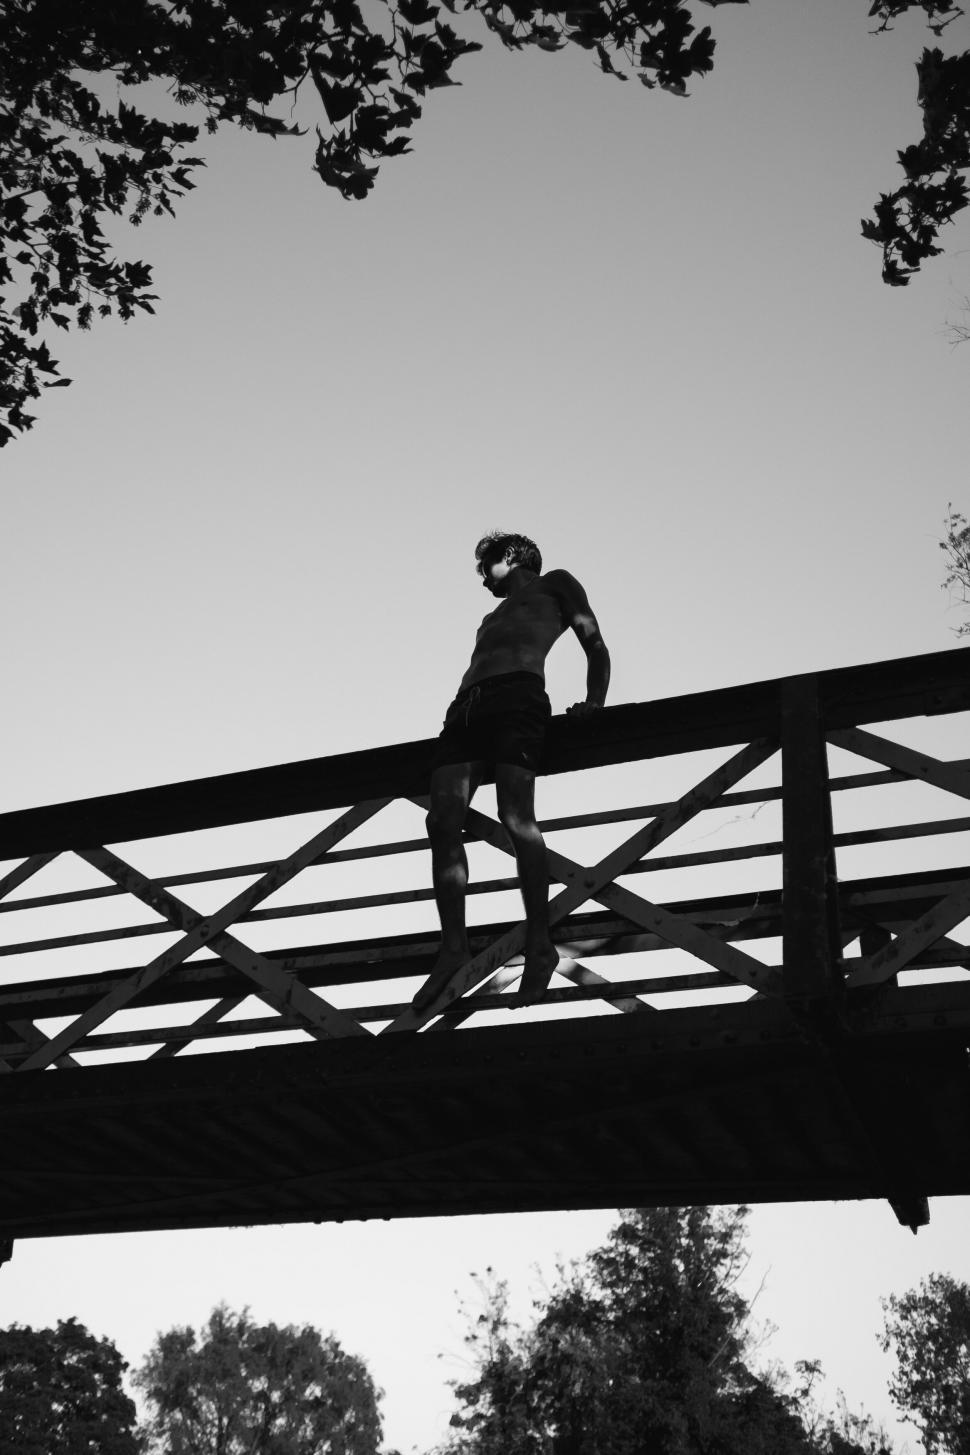 Free Image of Silhouette on bridge in black and white 